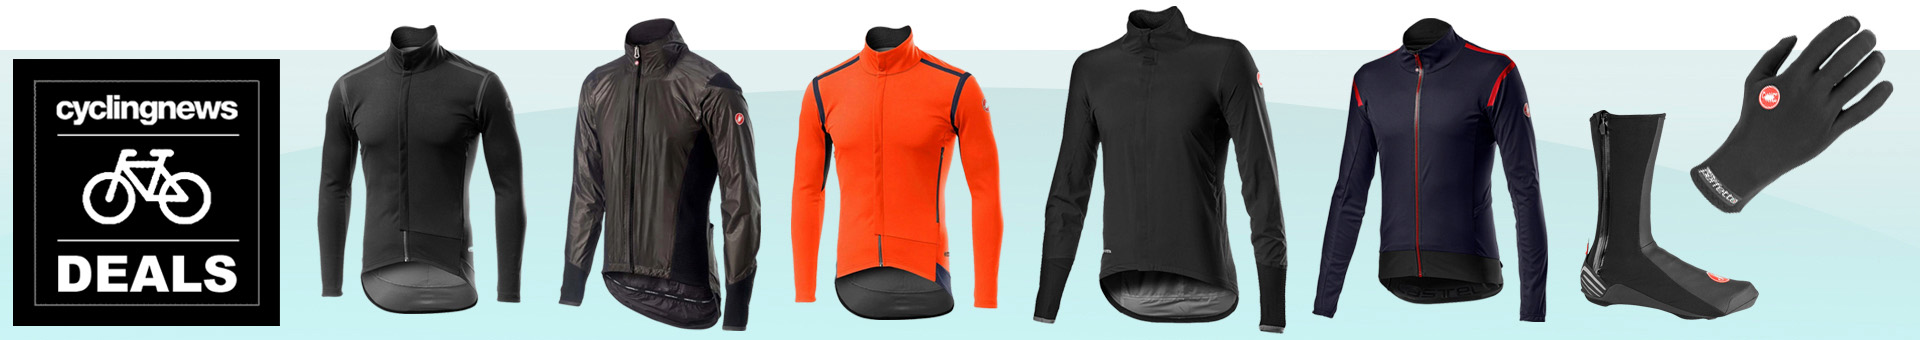 Castelli Save on winter including Perfetto, Alpha and Idro Cyclingnews